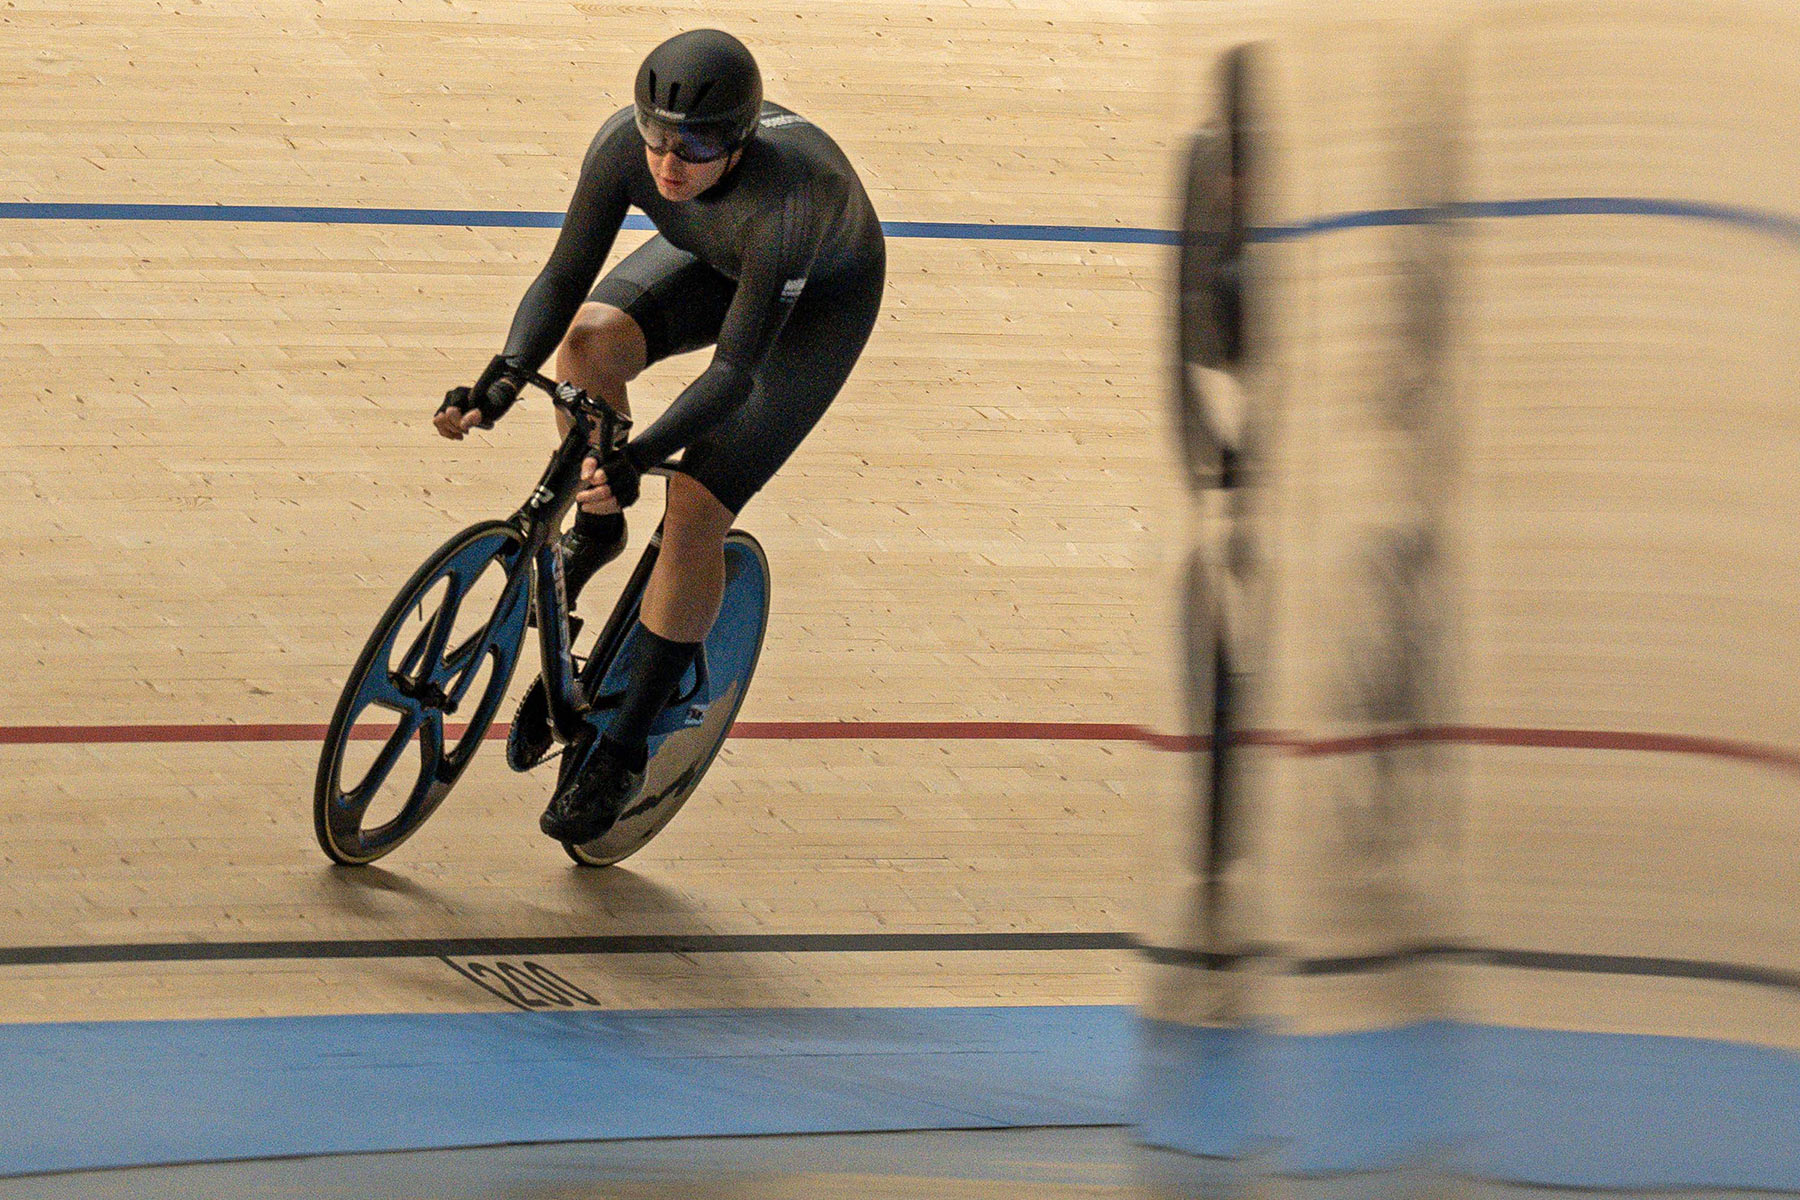 All-new Ridley Arena track bikes in affordable Alloy or Fast carbon